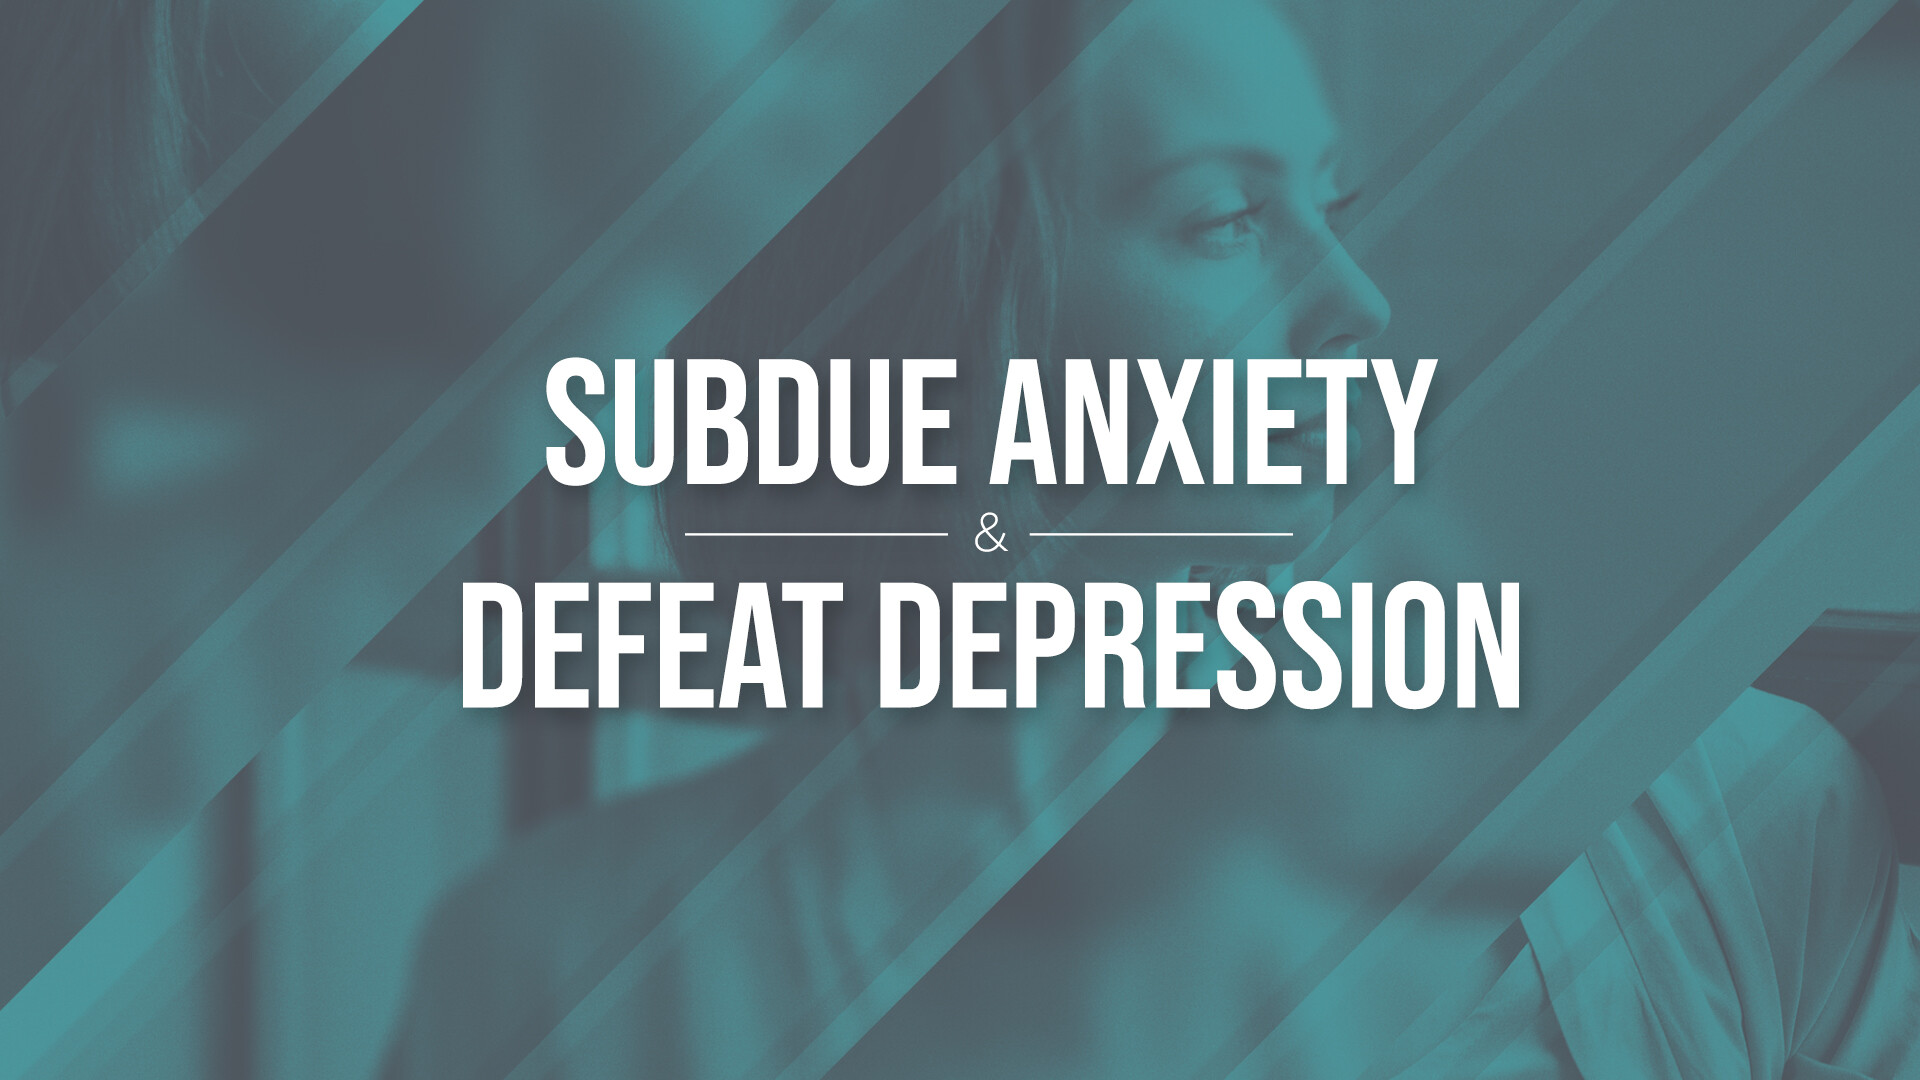 Subdue Anxiety and Defeat Depression